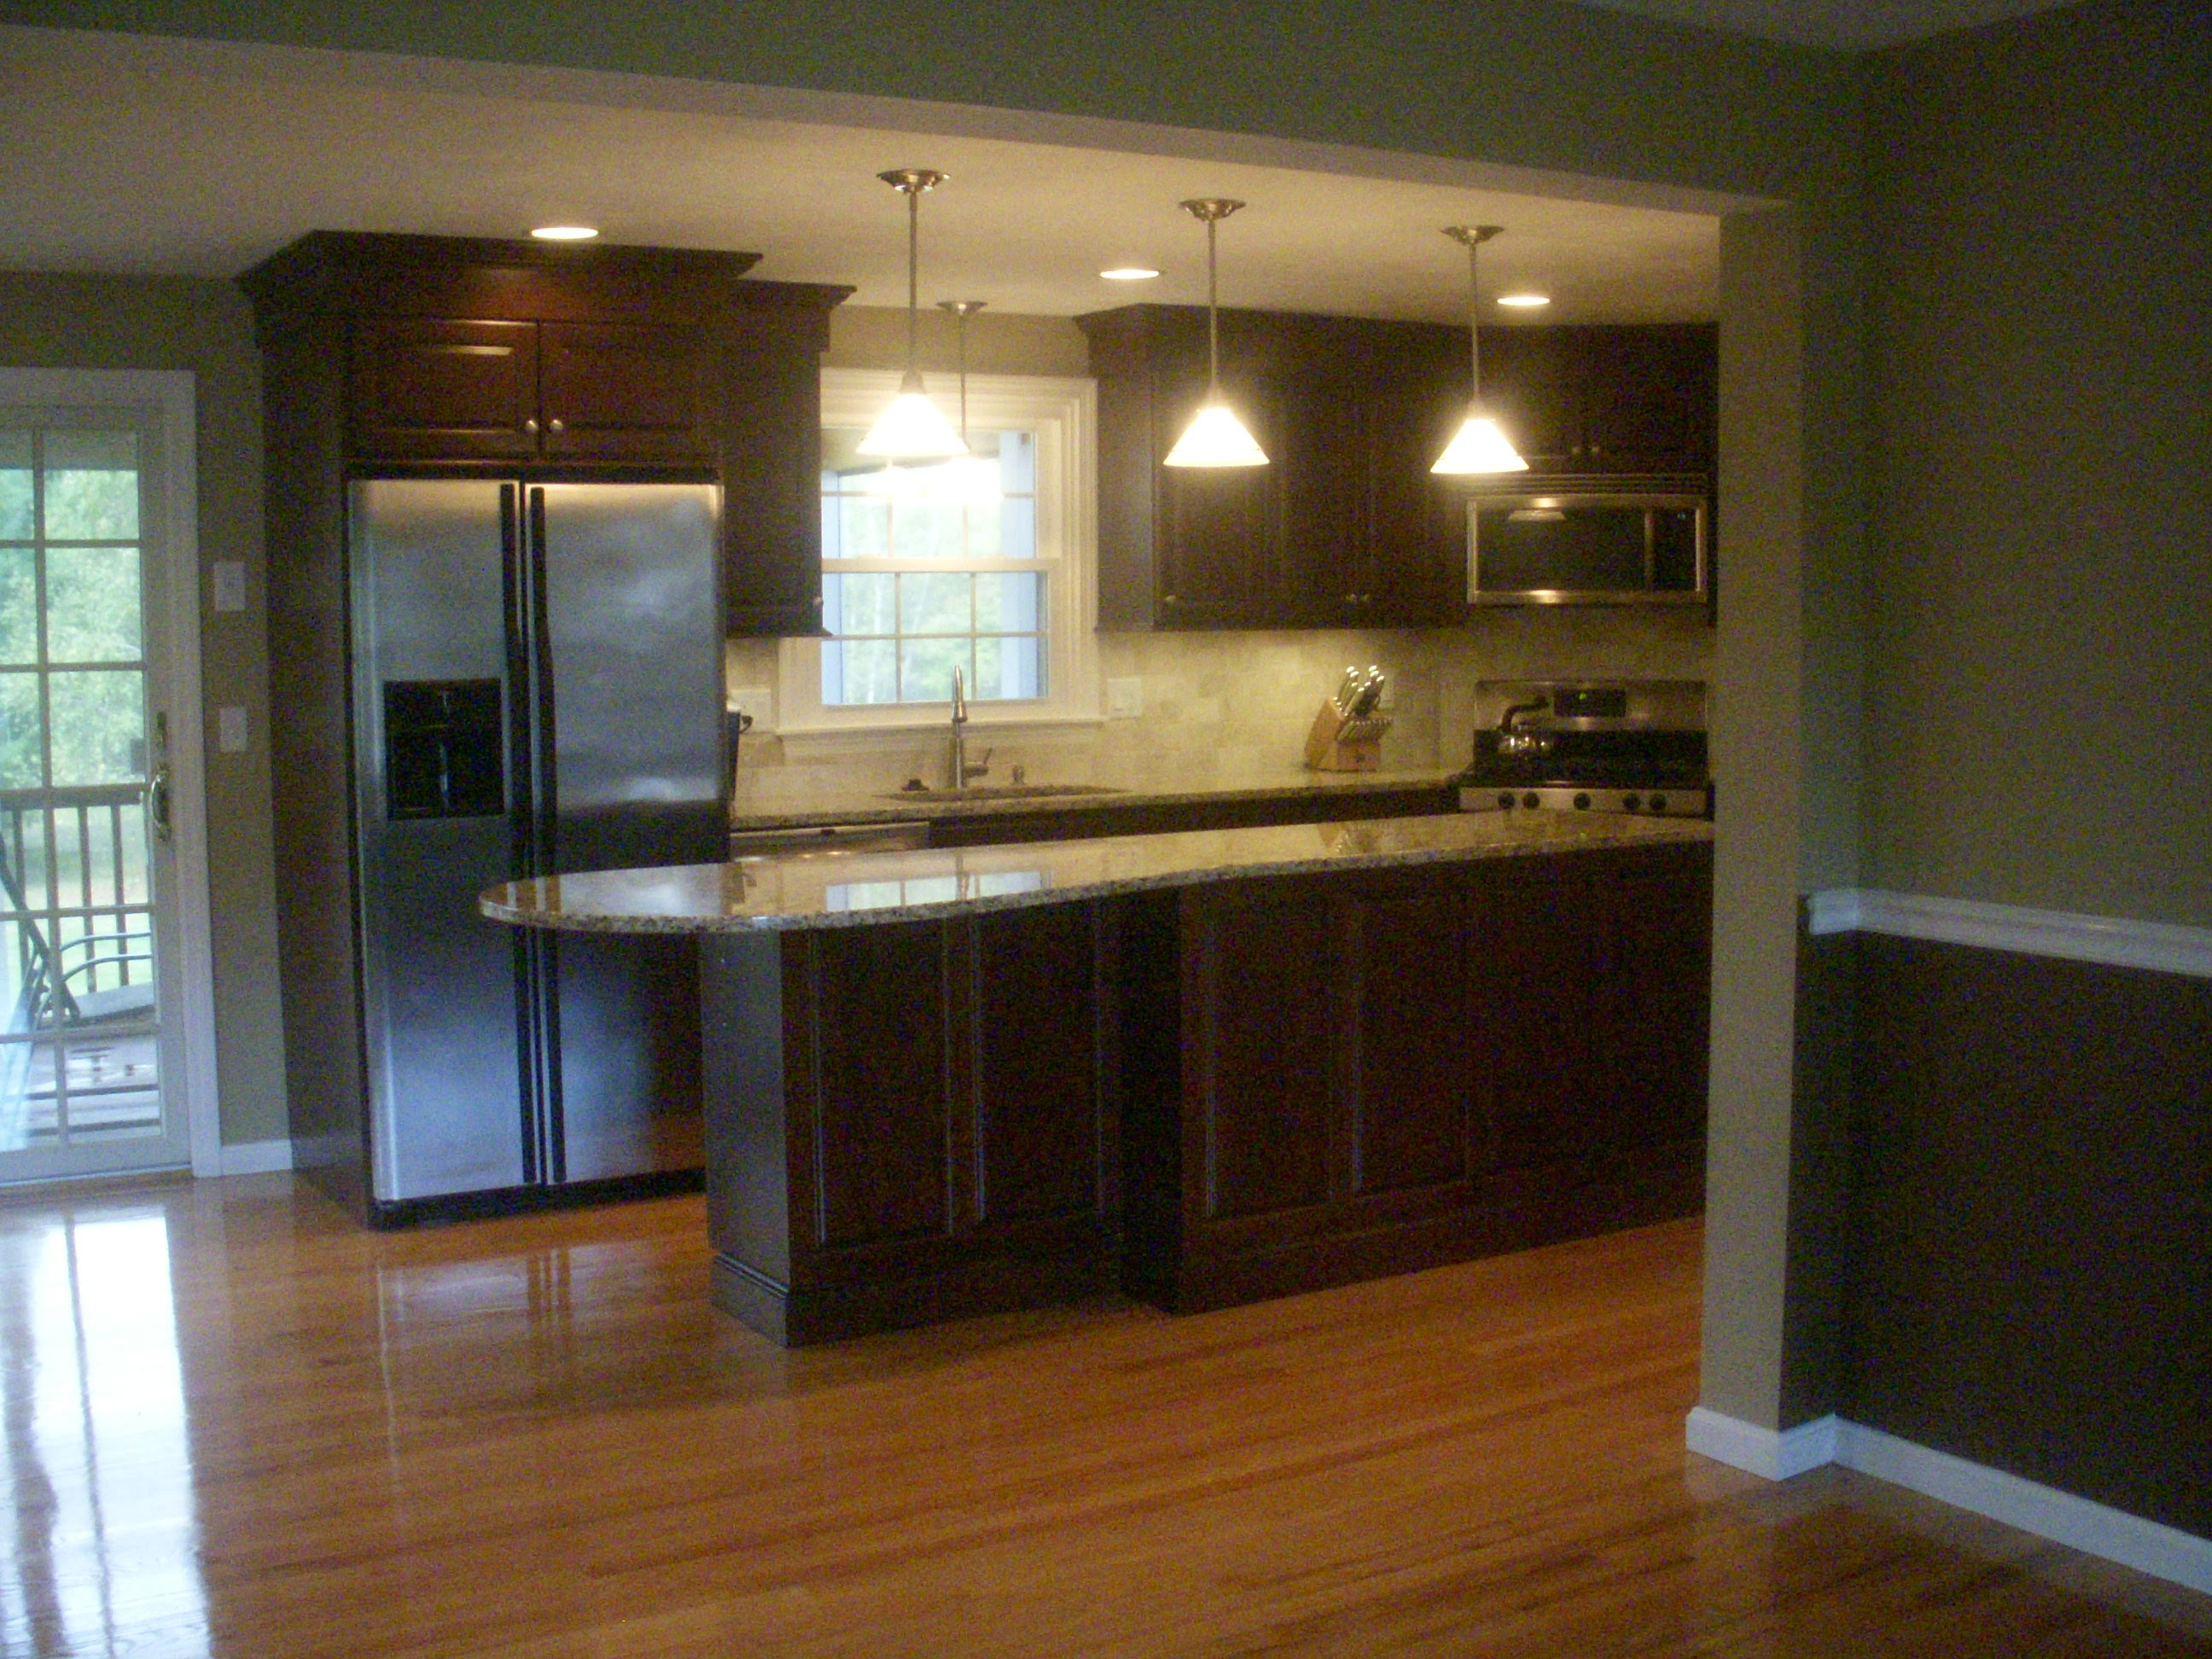 Wooden Floor For Kitchen 20 Examples Of Wood Laminate Flooring For Your / They